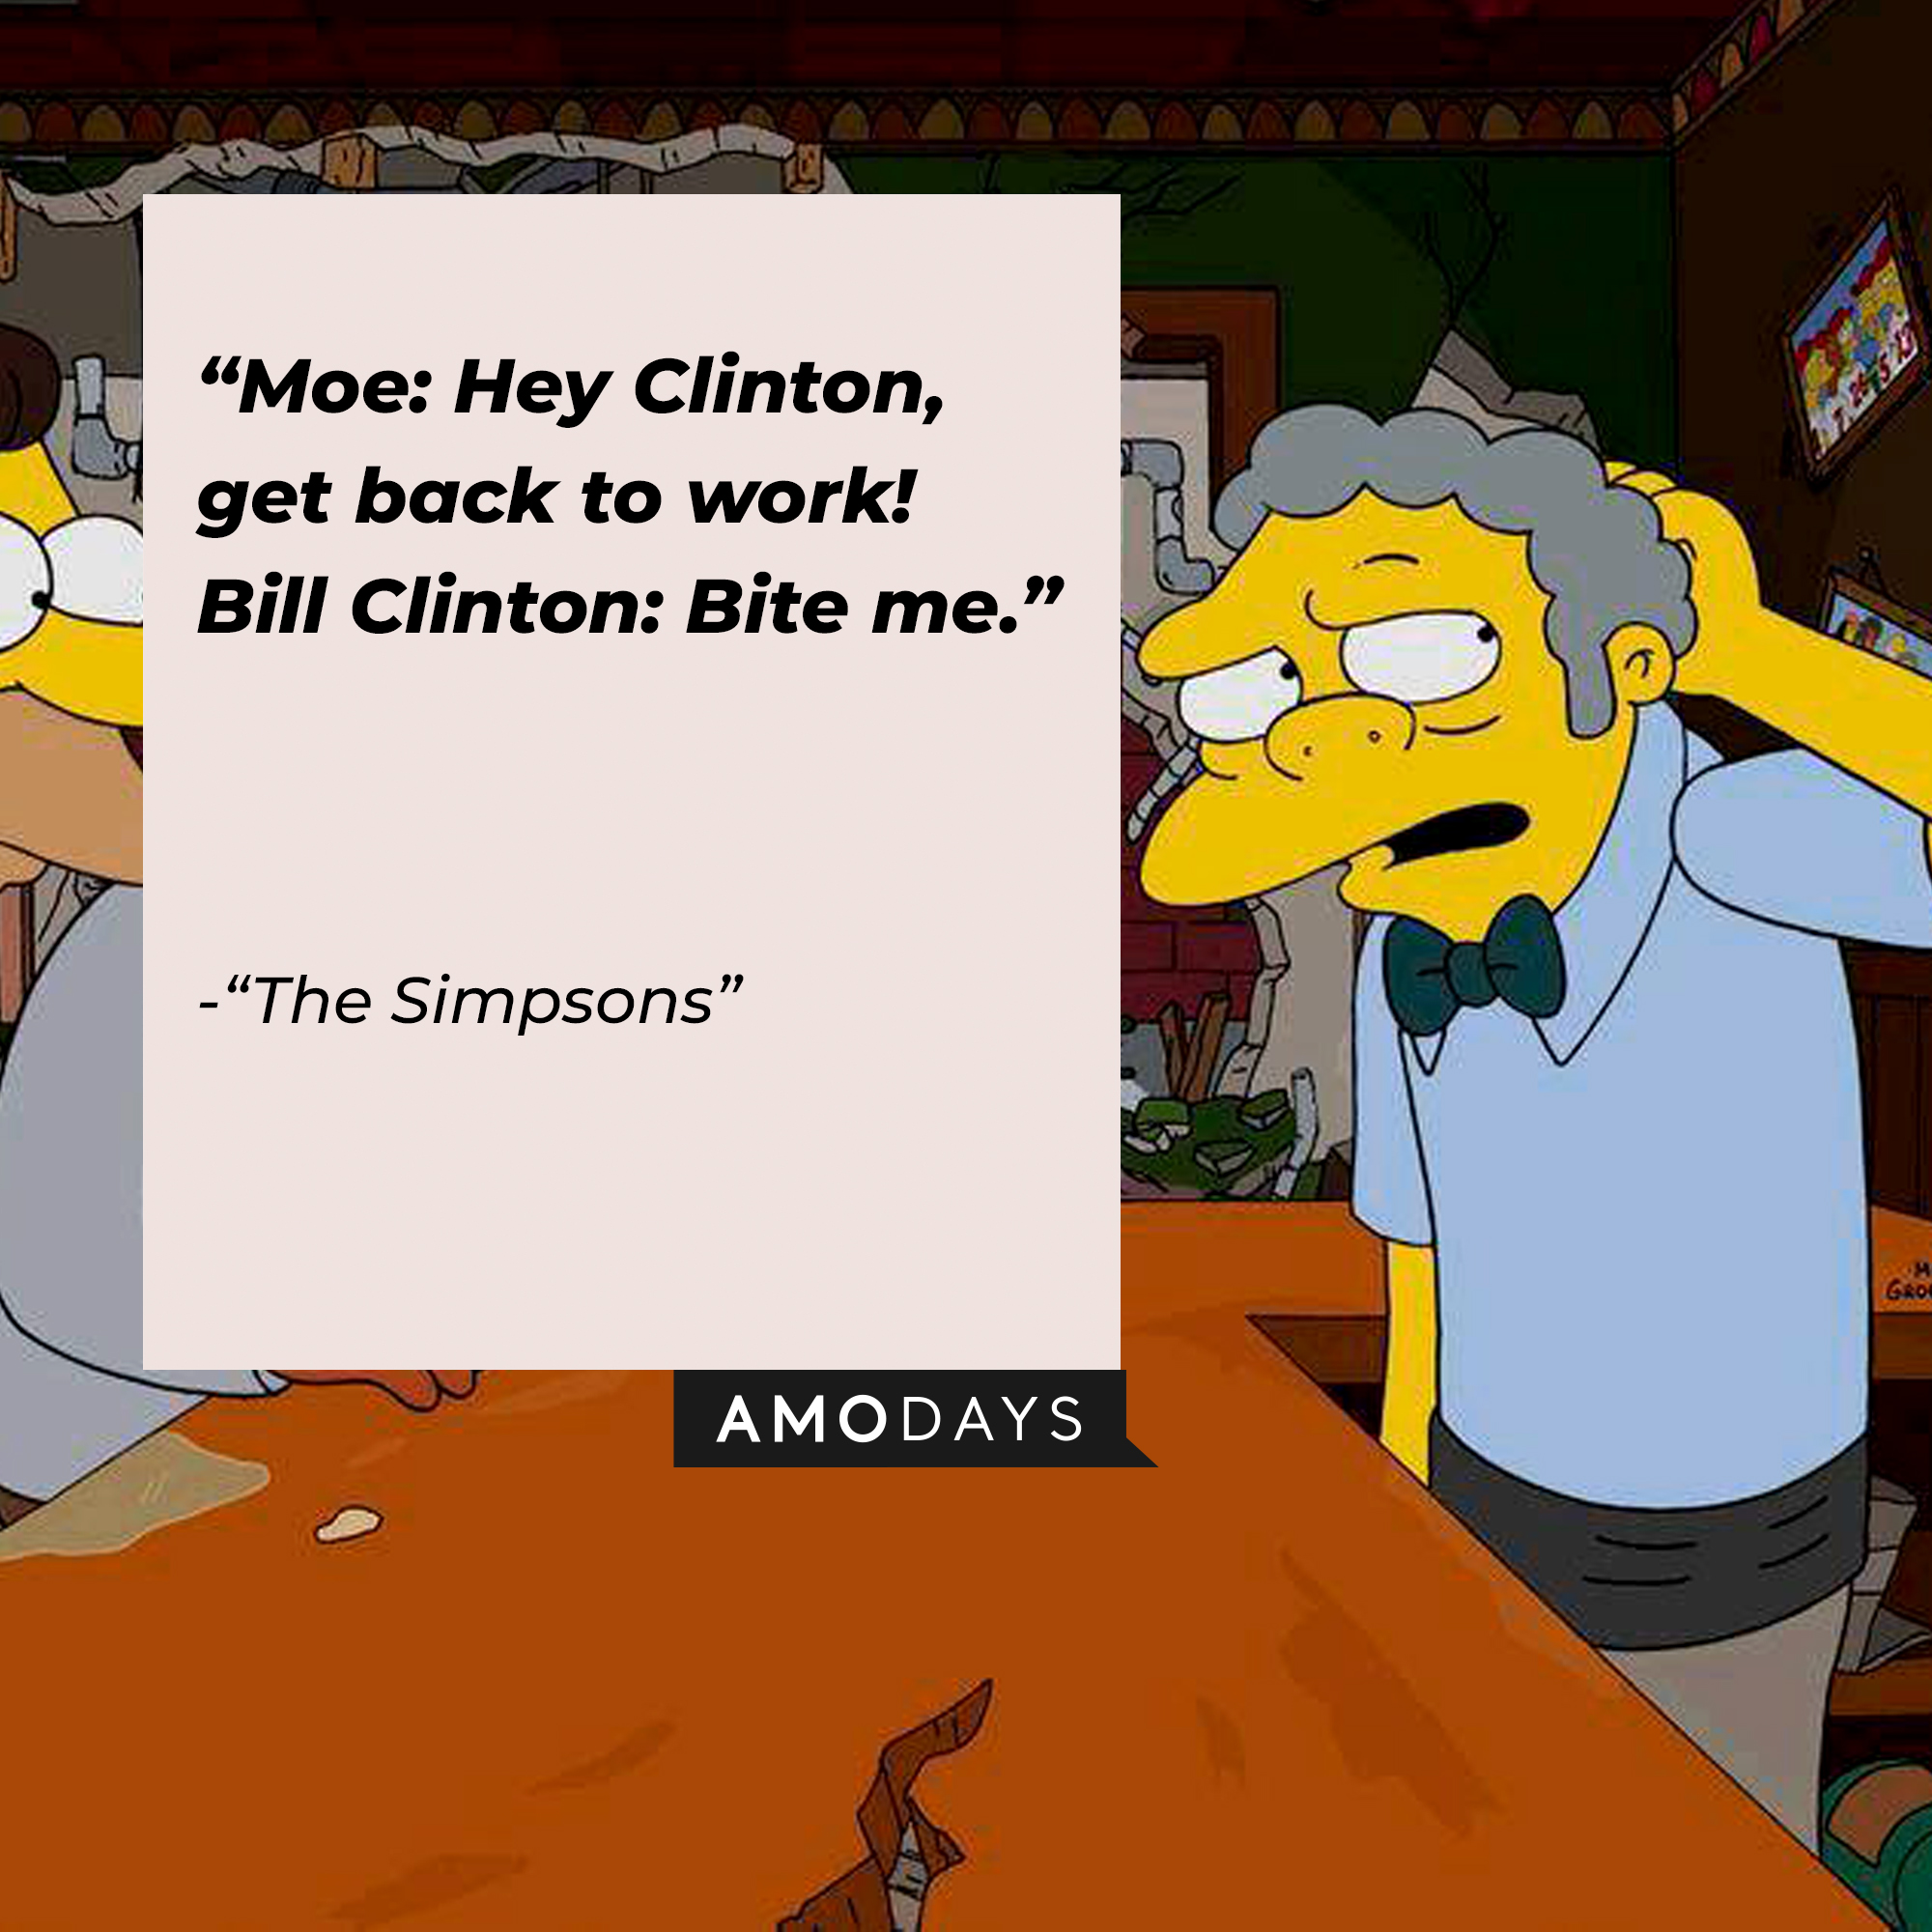 Image of Moe Szyslak with his quote from "The Simpsons:" "Moe: Hey Clinton, get back to work! ; Bill Clinton: Bite me." | Source: Facebook.com/TheSimpsons